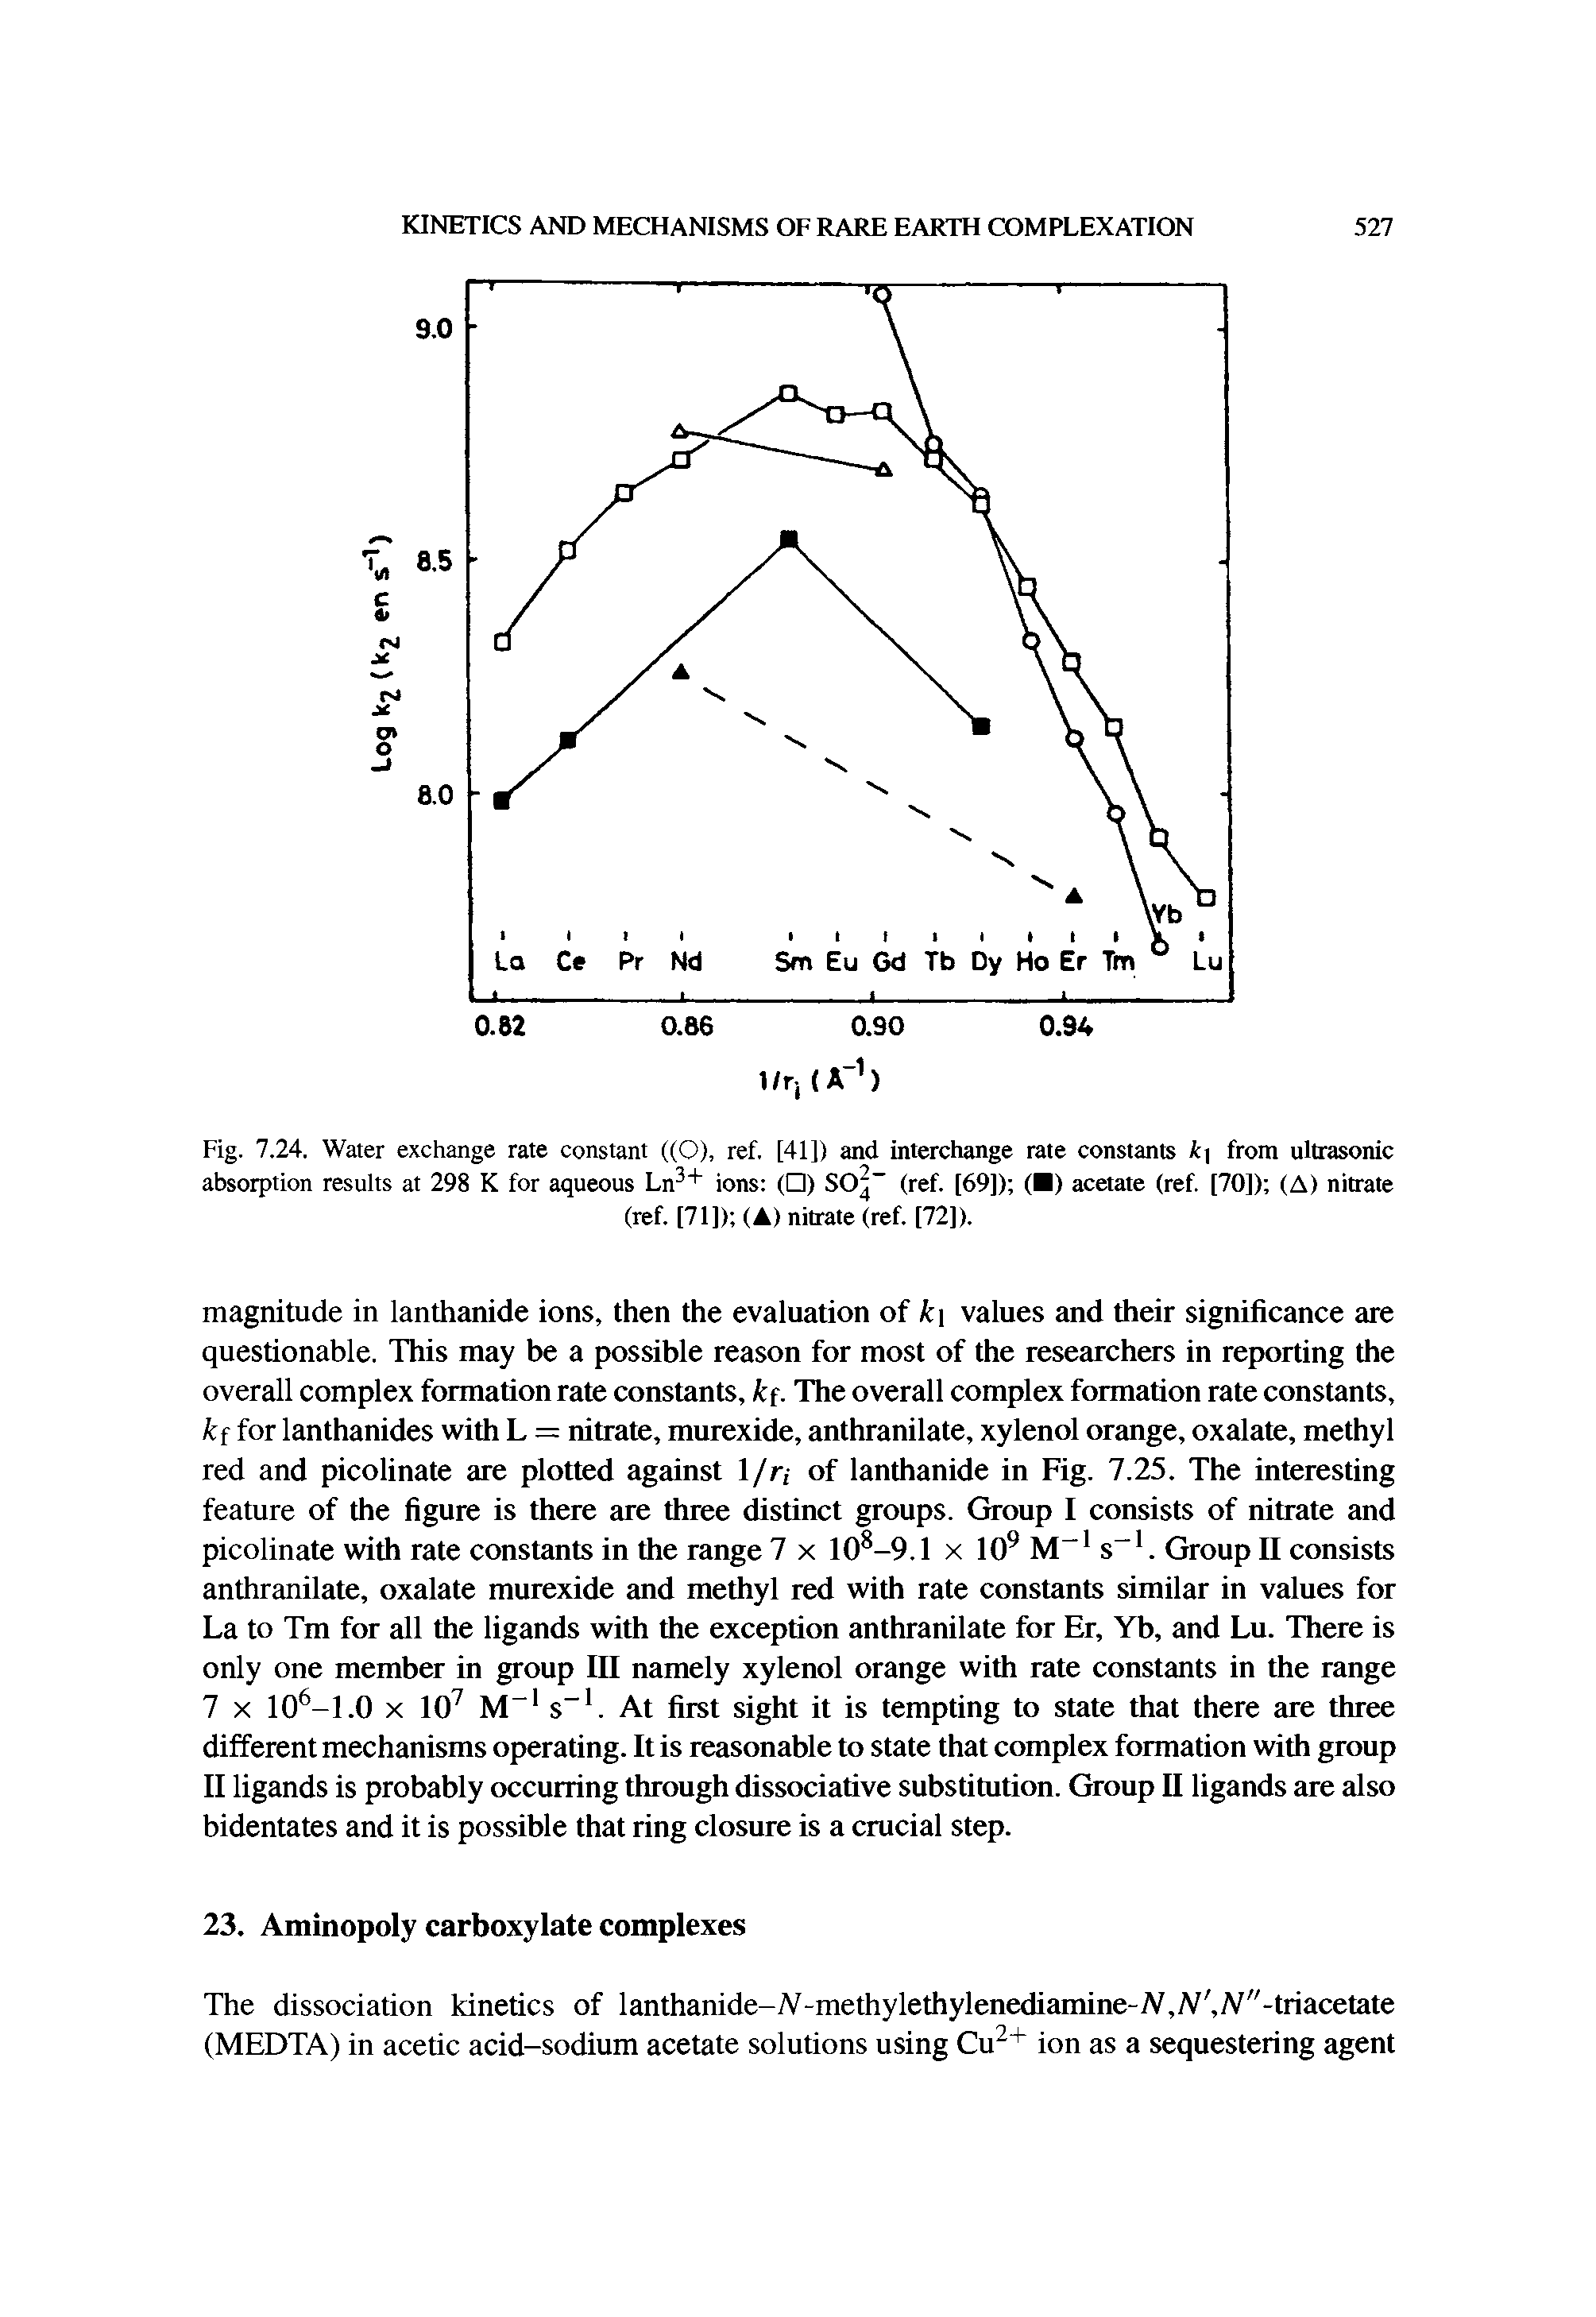 Fig. 7.24. Water exchange rate constant ((O), ref. [41]) and interchange rate constants k from ultrasonic absorption results at 298 K for aqueous Ln3+ ions ( ) SO - (ref. [69]) ( ) acetate (ref. [70]) (A) nitrate...